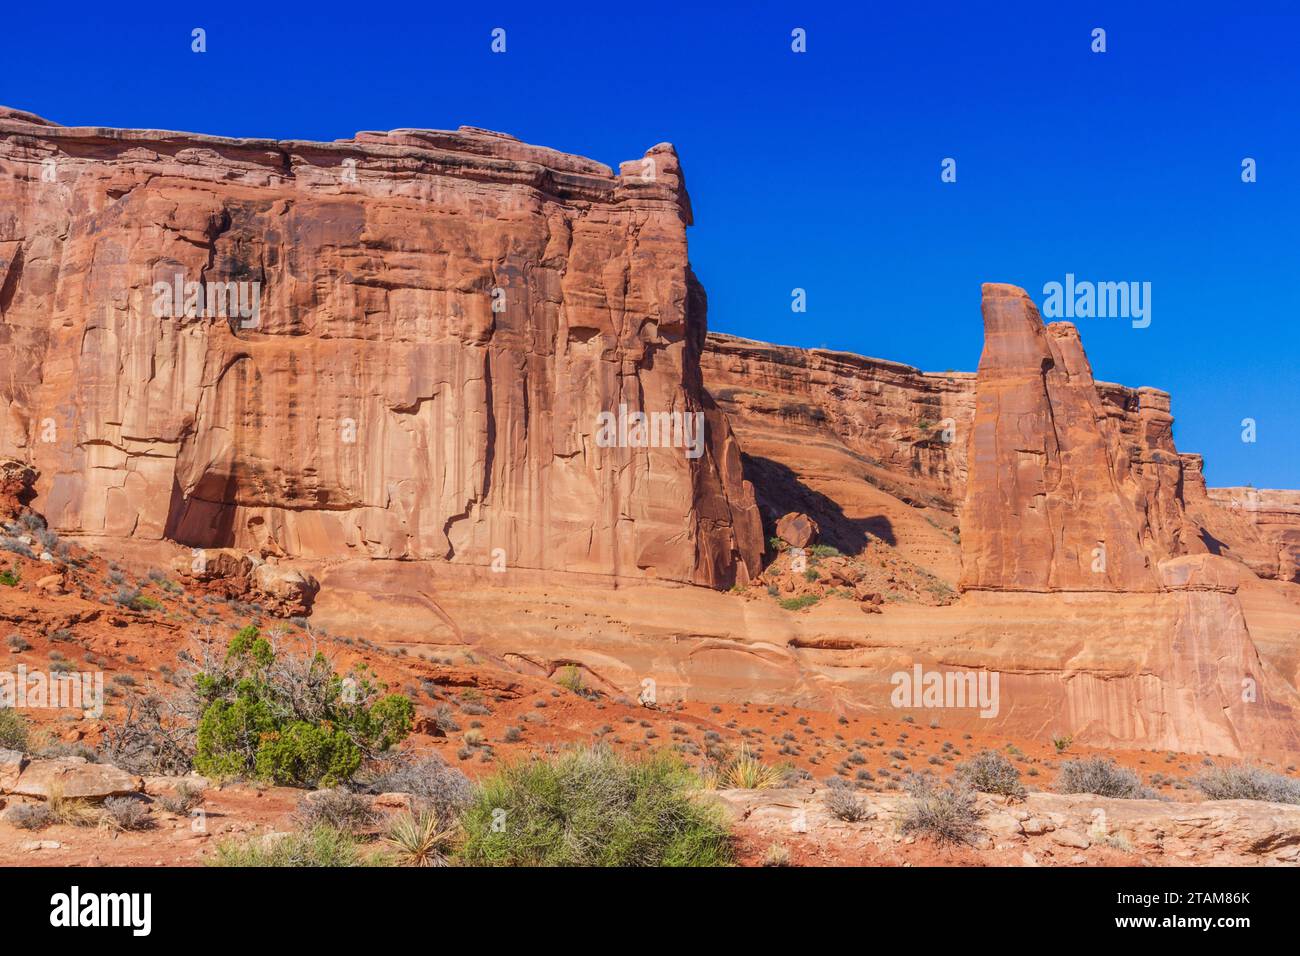 The Courthouse Towers rock formation in early morning light in Arches National Park. Stock Photo